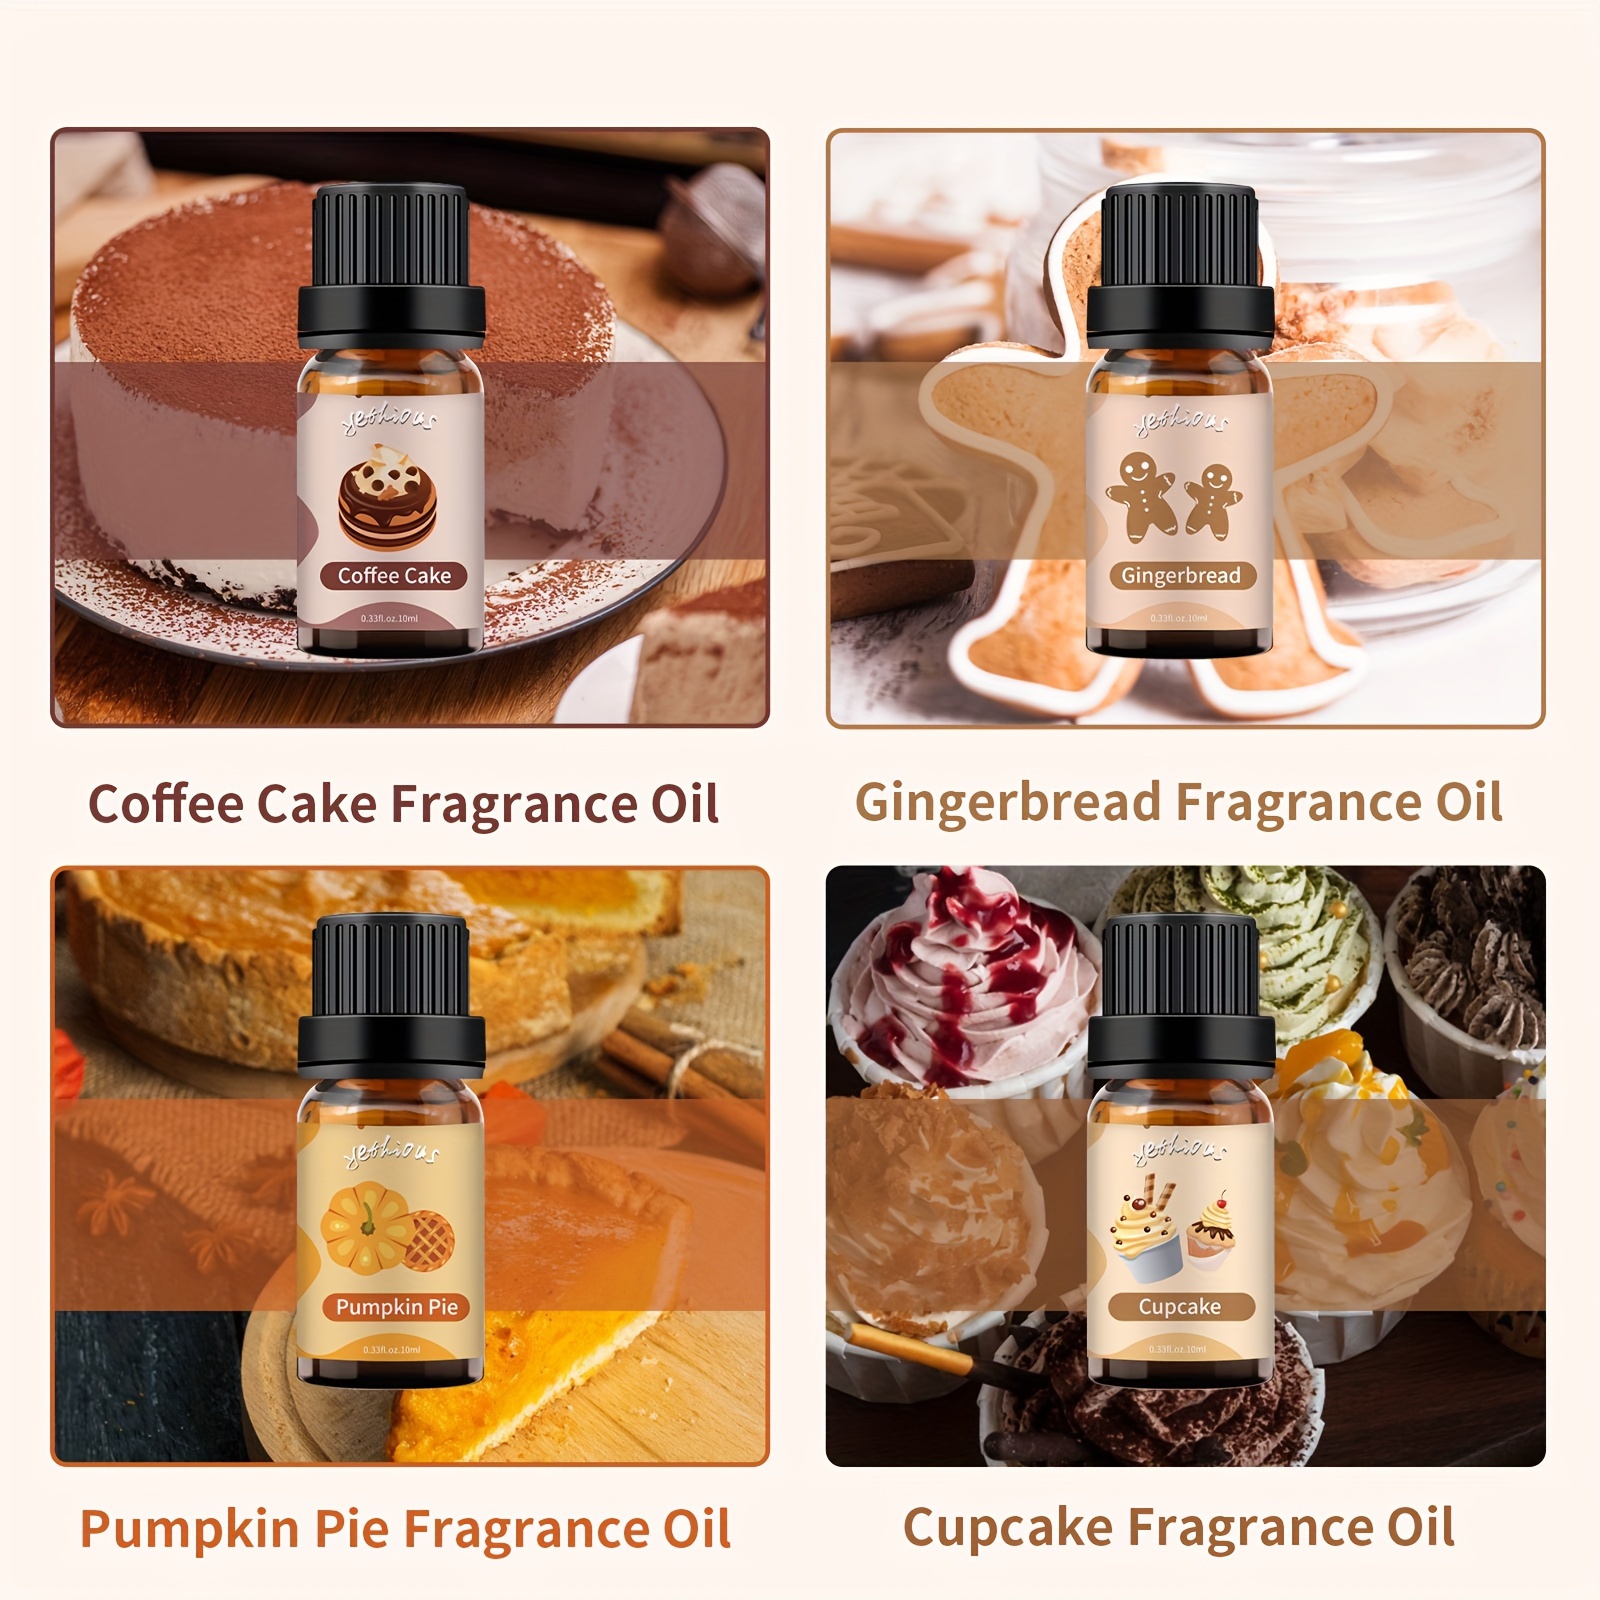 1Set 4pcs 10ml/0.33oz Christmas Food Scent Oil Pumpkin Pie Sugar Cookie  Fragrance Oil, Essential Oil For Diffuser, Humidifier, Candle Making Soap  Scen